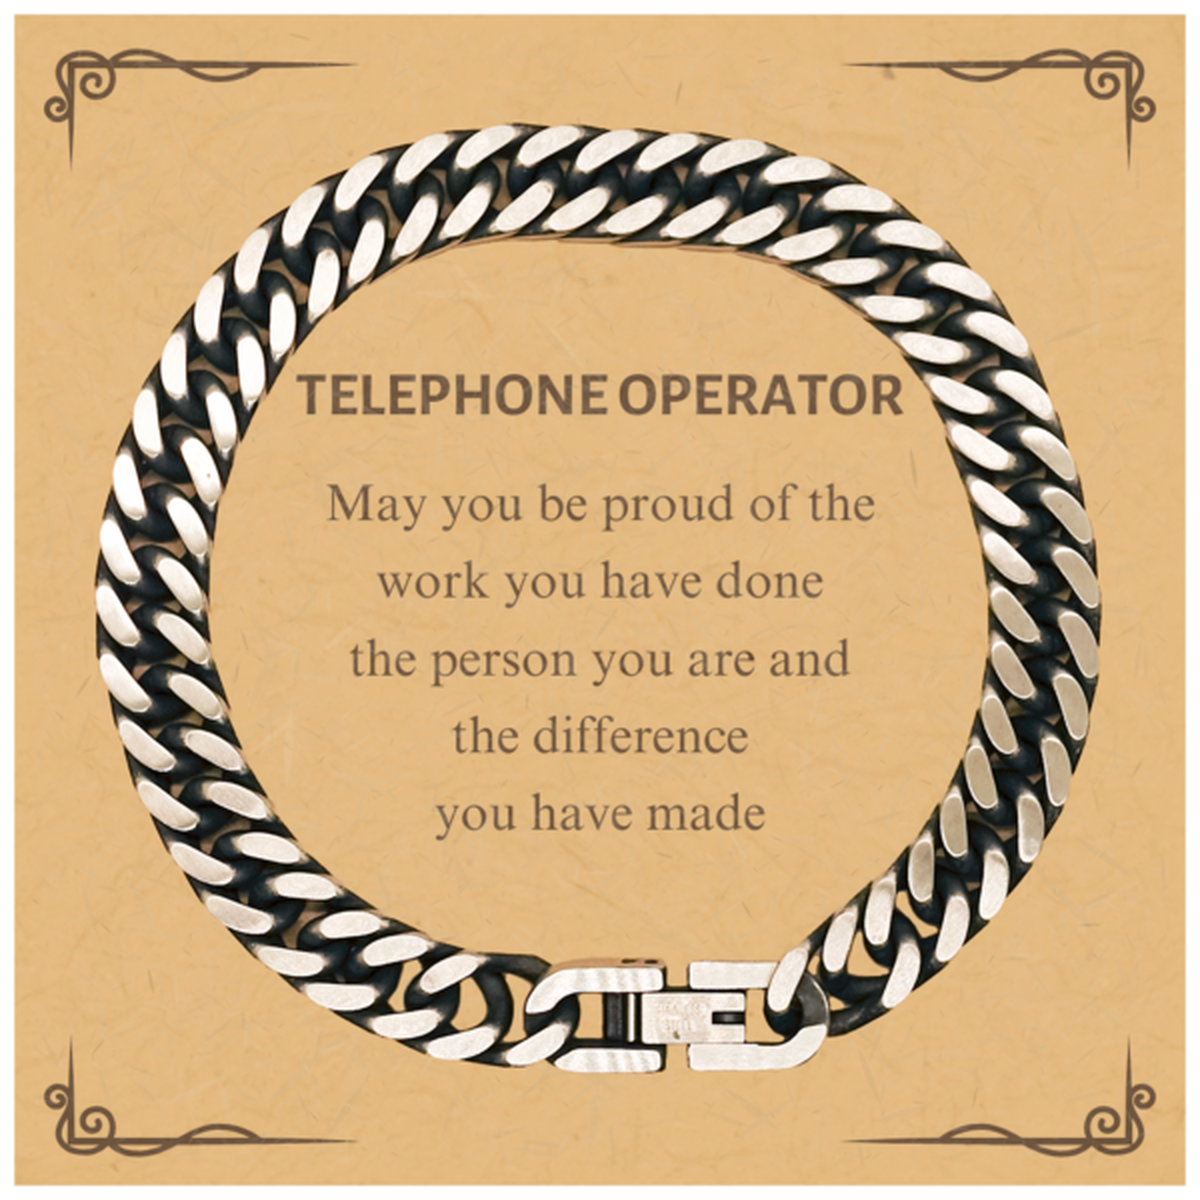 Telephone Operator May you be proud of the work you have done, Retirement Telephone Operator Cuban Link Chain Bracelet for Colleague Appreciation Gifts Amazing for Telephone Operator